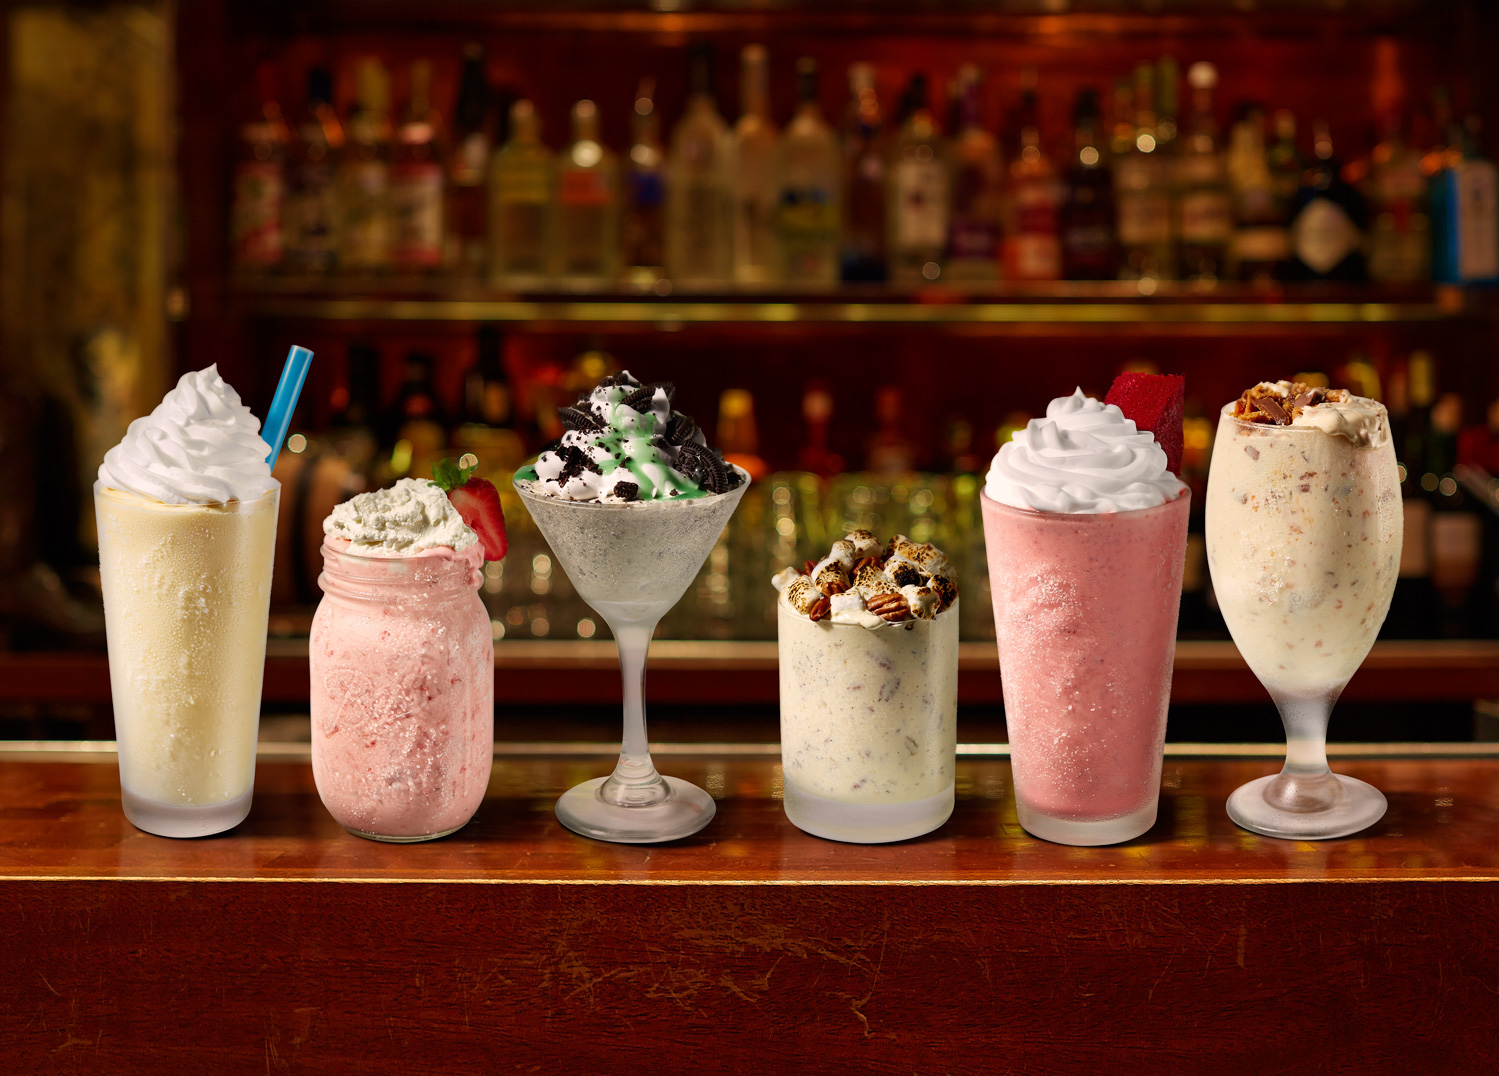 You got: Alcoholic Milkshakes! What Ridiculous Food Trend Are You?